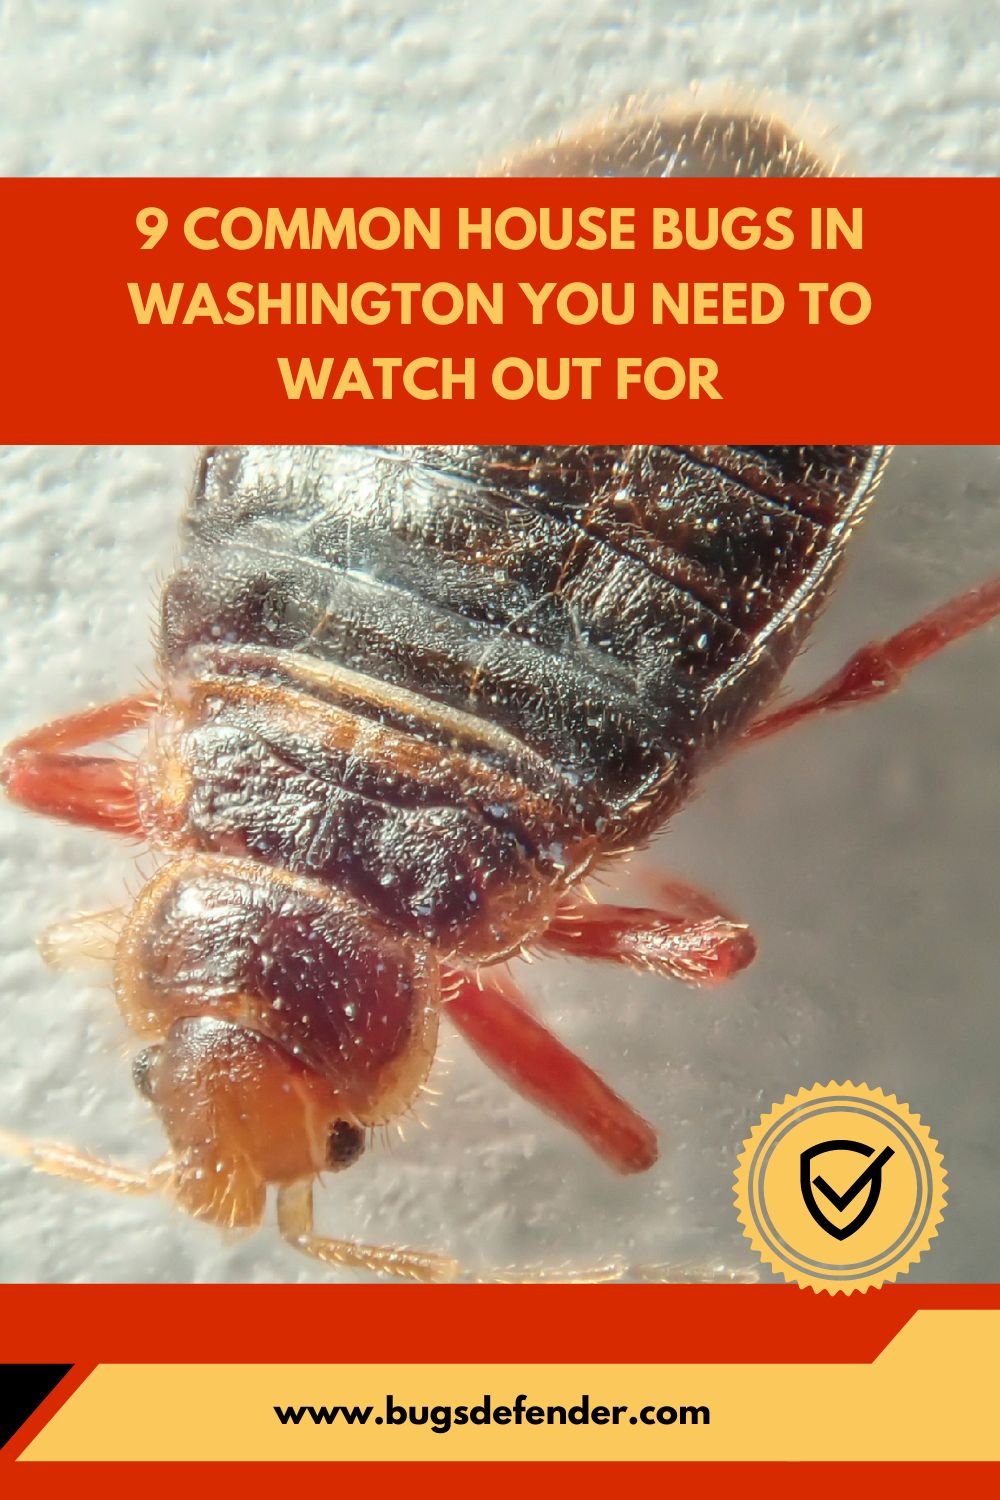 9 Common House Bugs in Washington You Need To Watch Out For